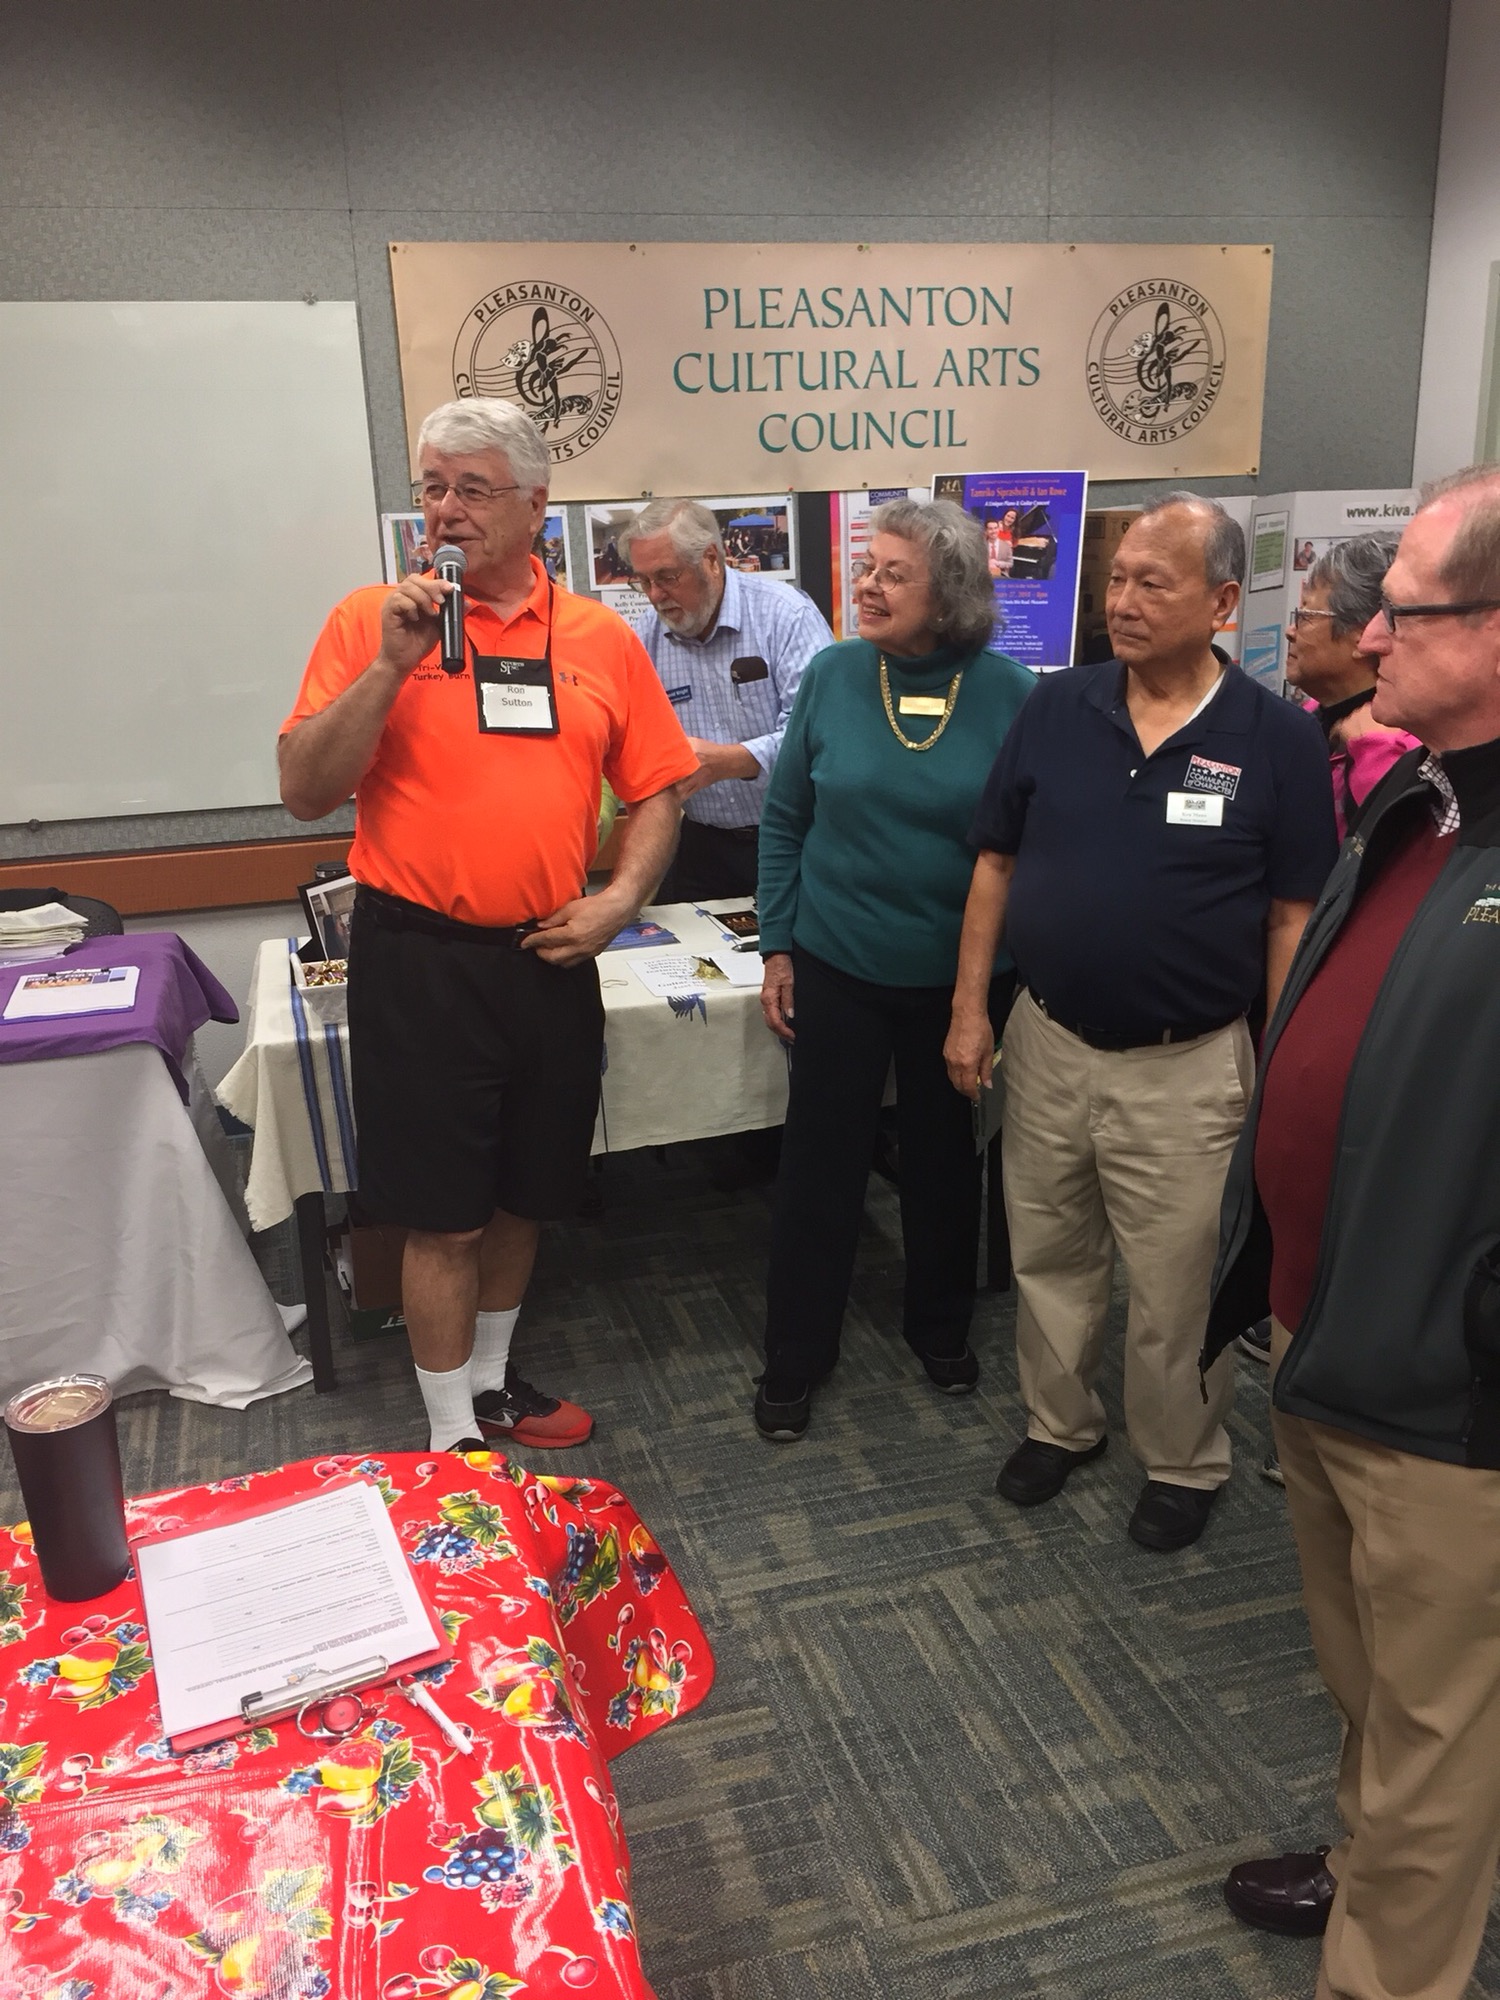 Attendees & Exhibitors at the make A Difference For Pleasanton Festival 2018